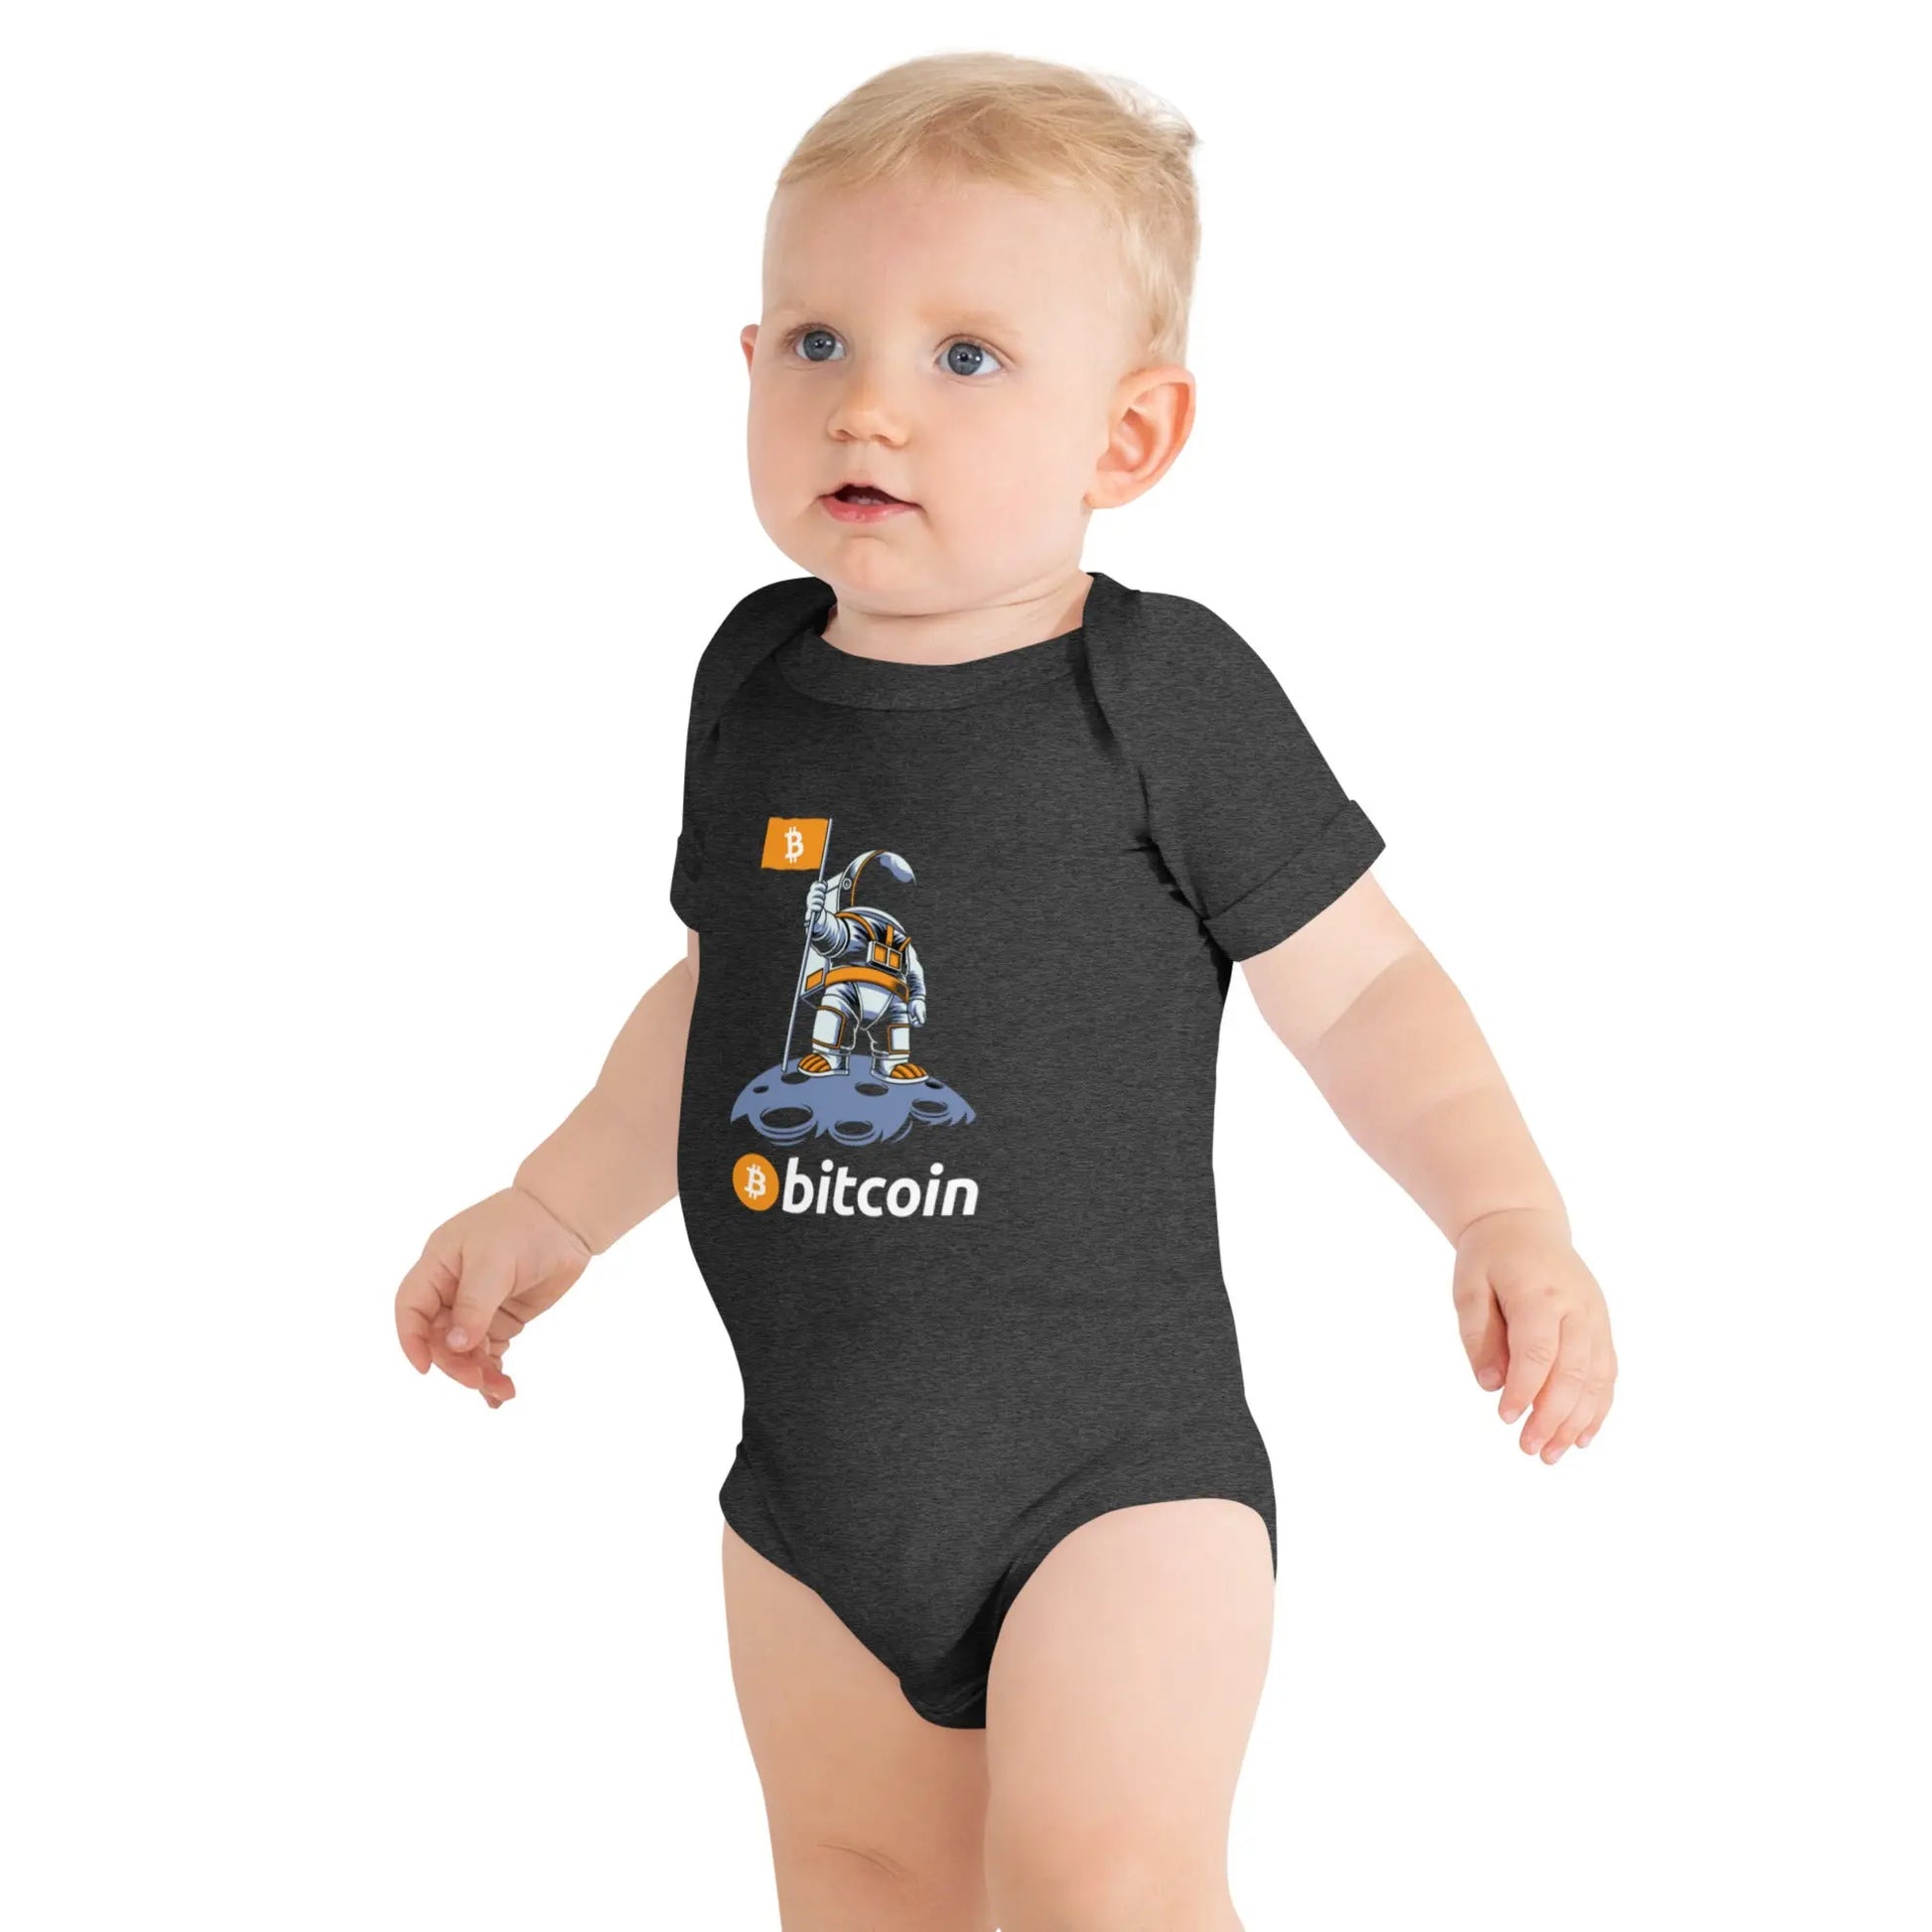 Bitcoin To The Moon - Baby Bitcoin Body Suit - One Piece with Short Sleeve Grey